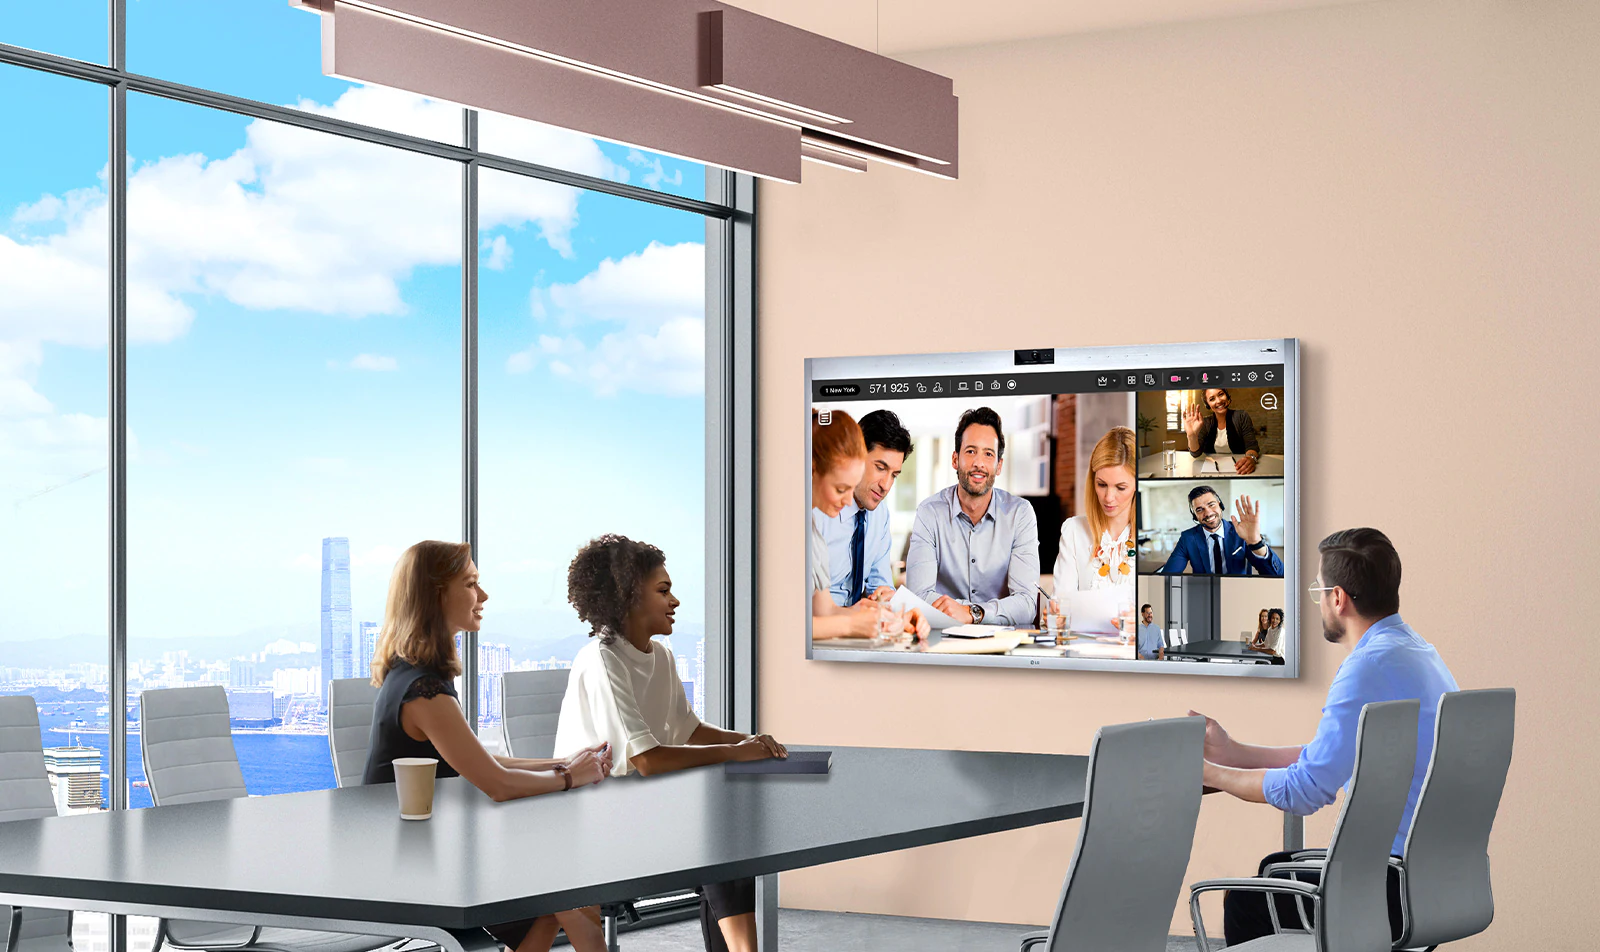 All-in-One Video Conferencing Display for Maximum Productivity